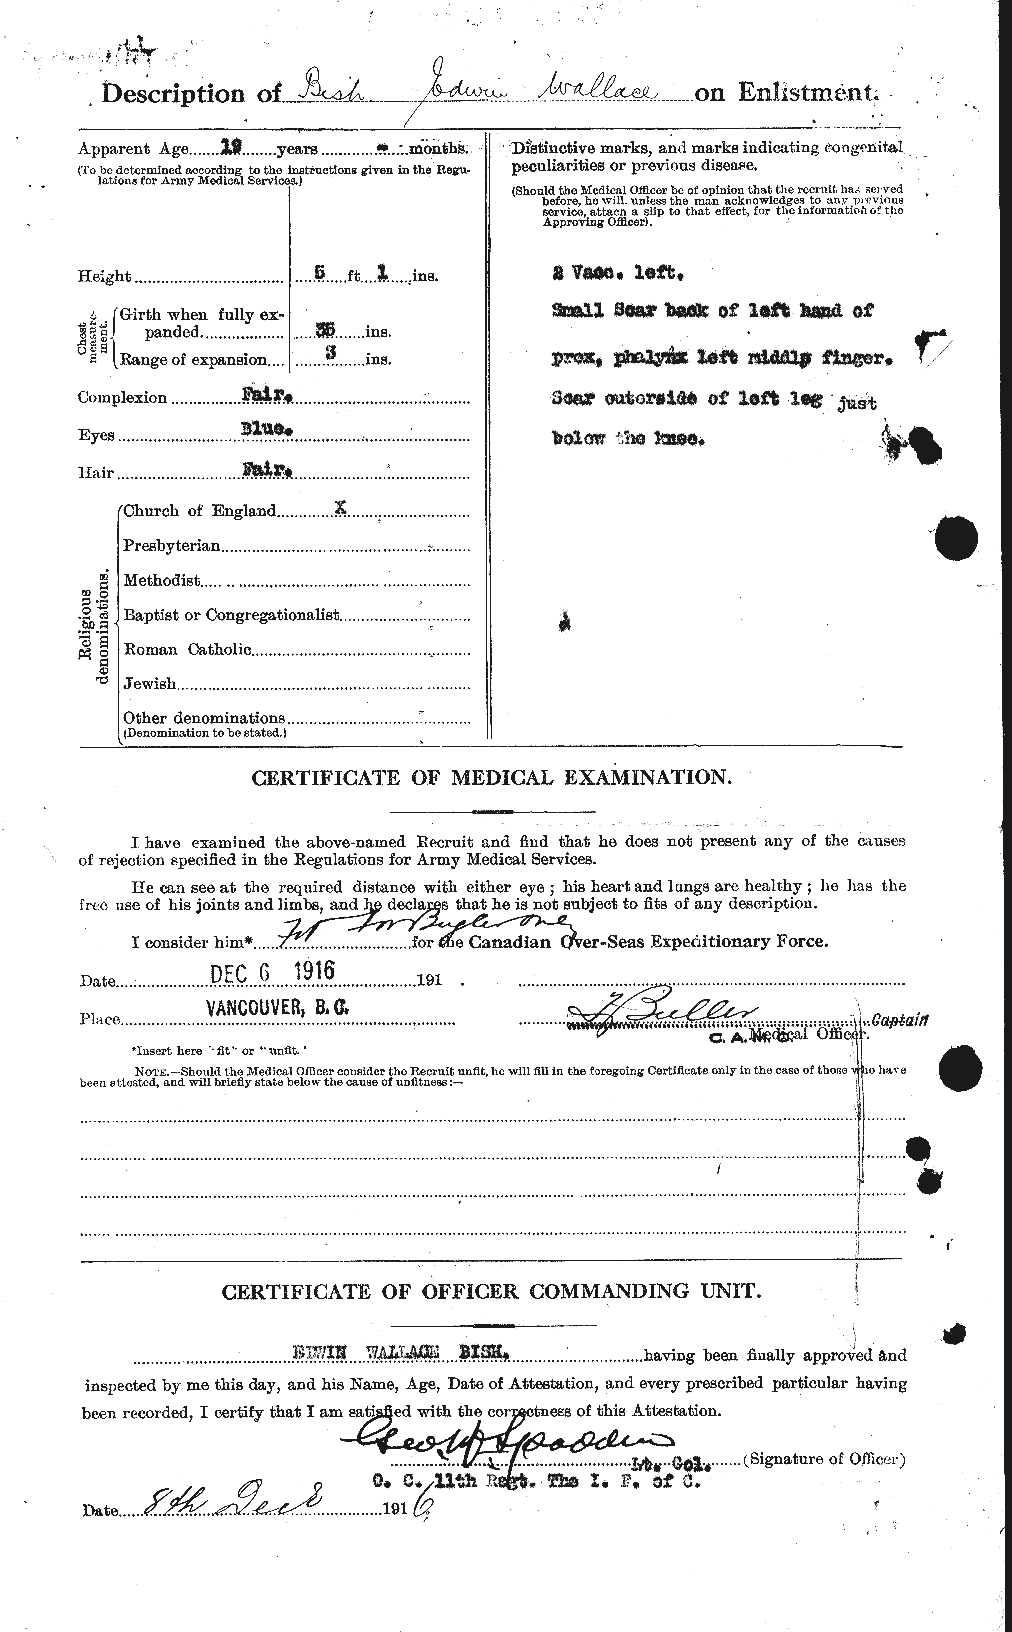 Personnel Records of the First World War - CEF 244142b